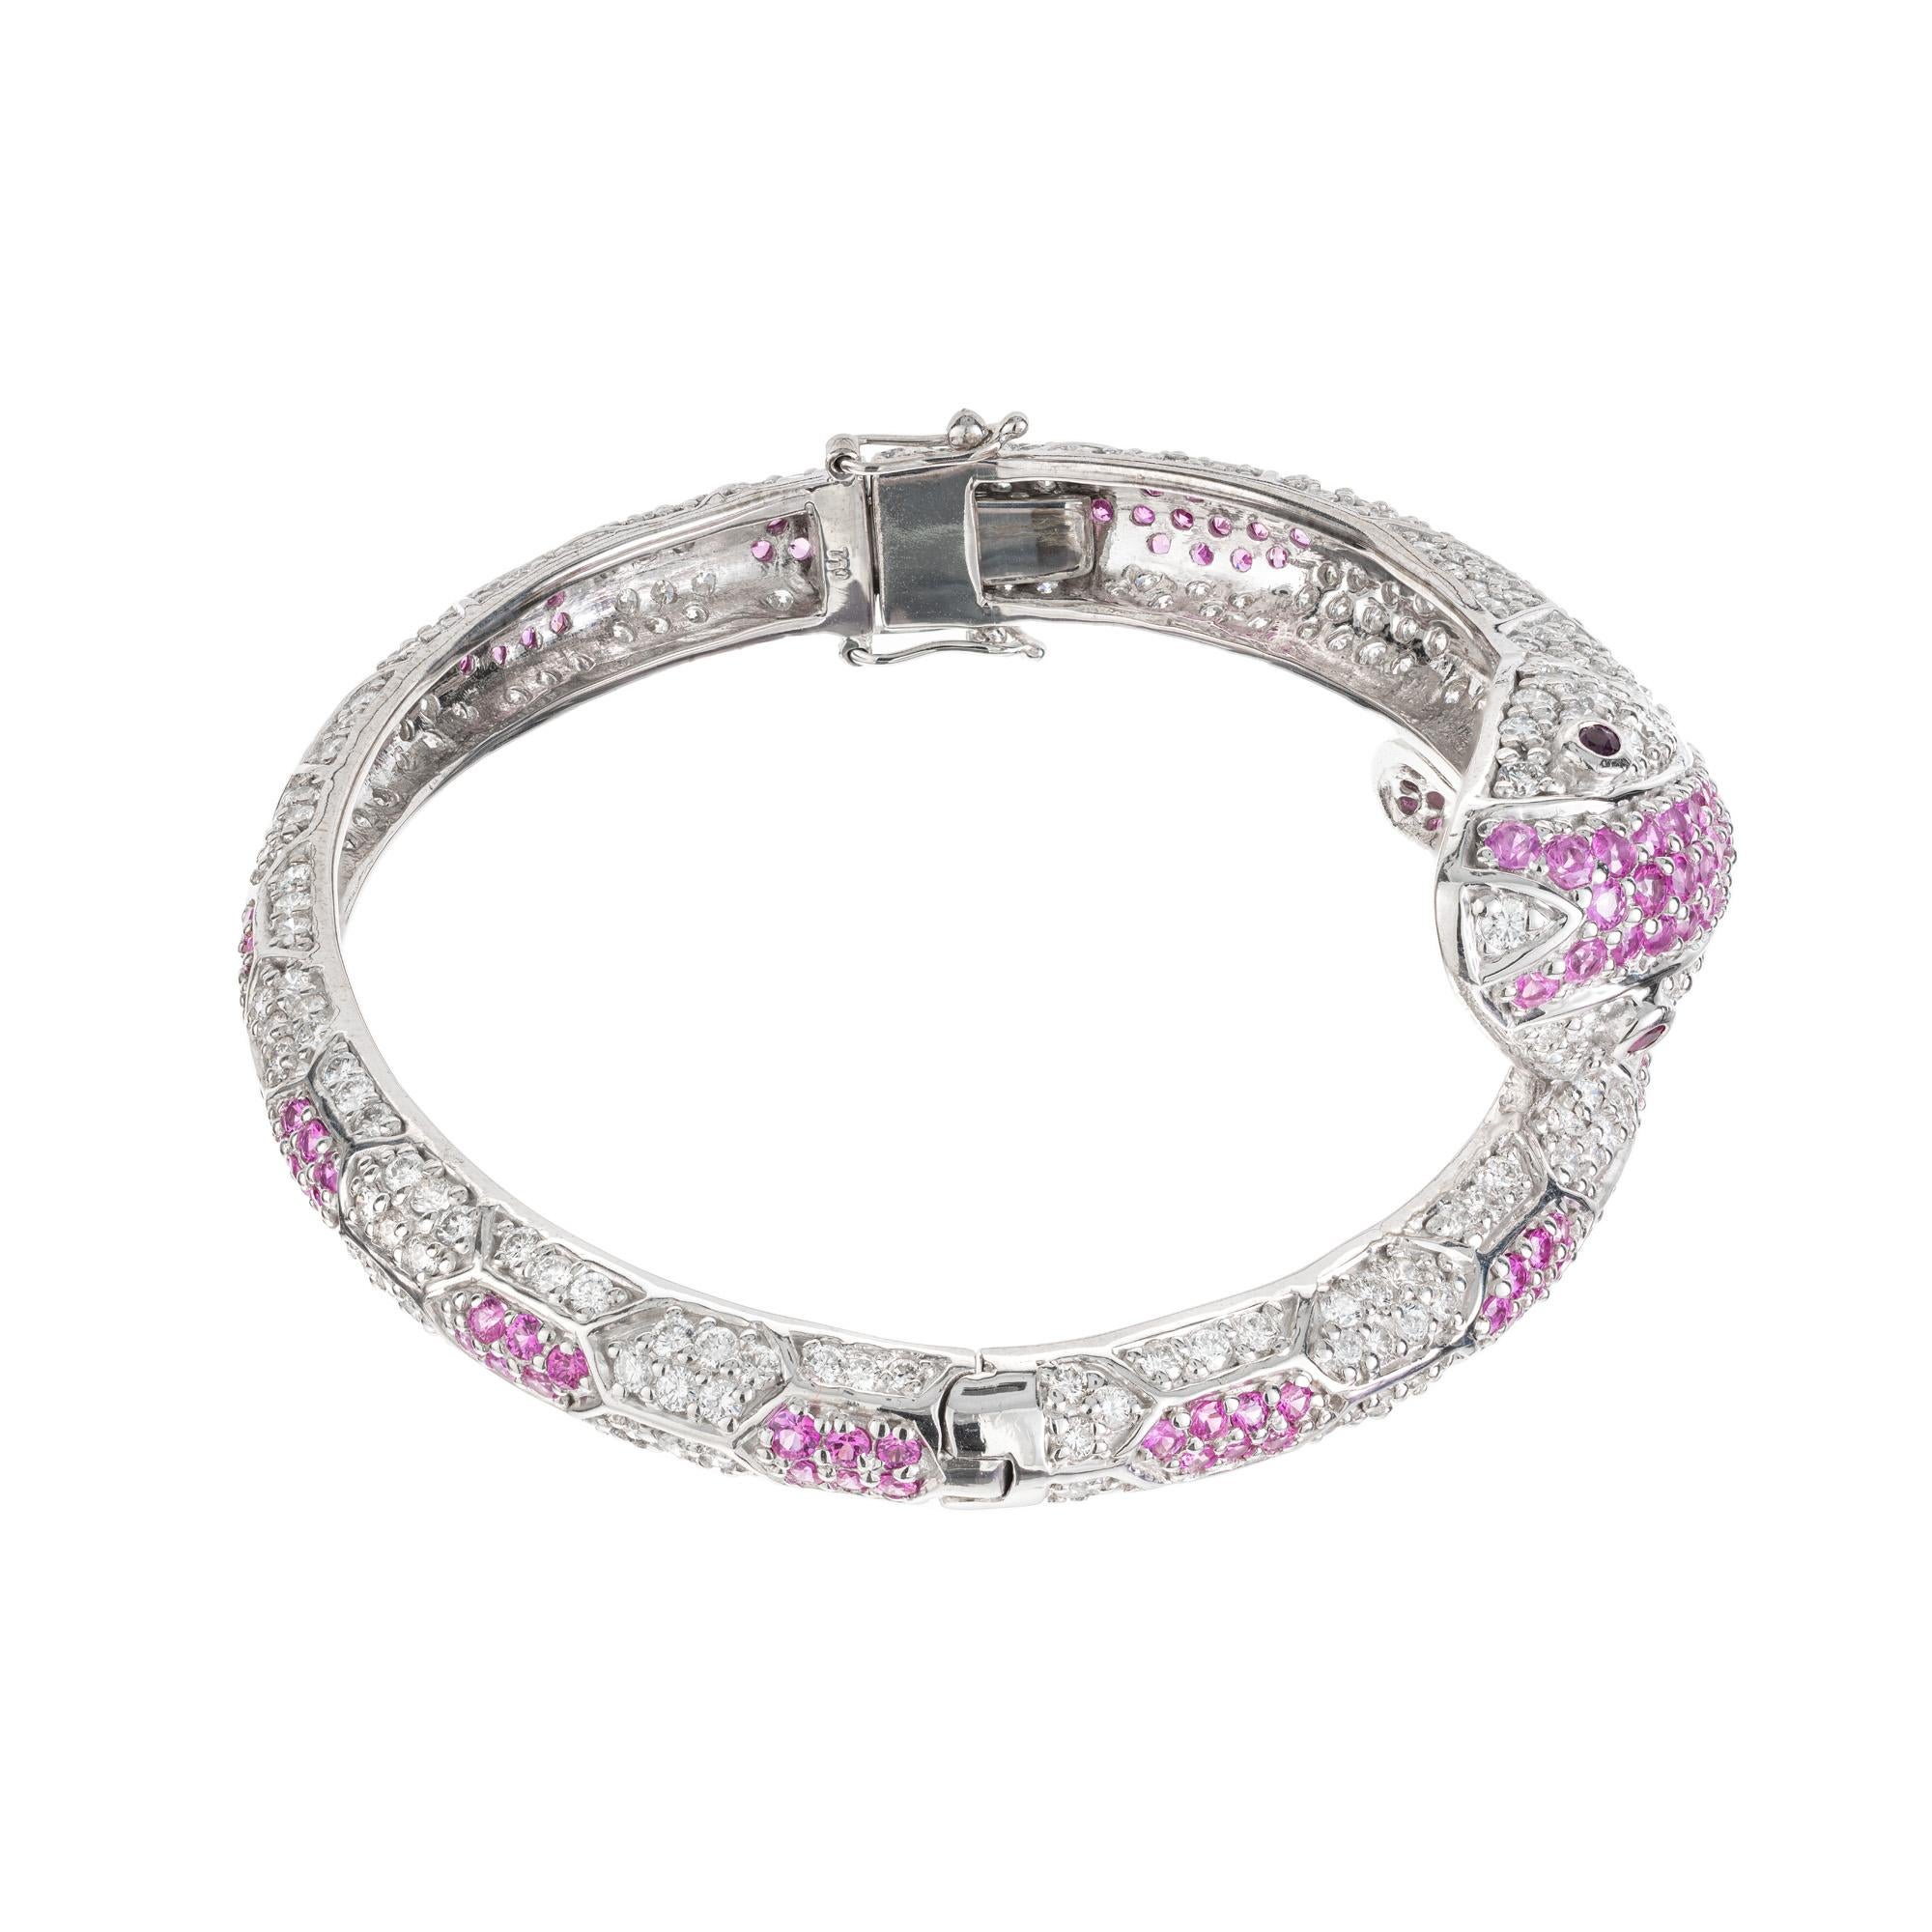 Ruby, diamond and sapphire snake hinged bangle bracelet. Simply spectacular. This 18k white gold bracelet is adorned with 151 pink round sapphires with and approximate total weight of 3.80cts. 316 full cut diamonds and 2 round red ruby eye. There is